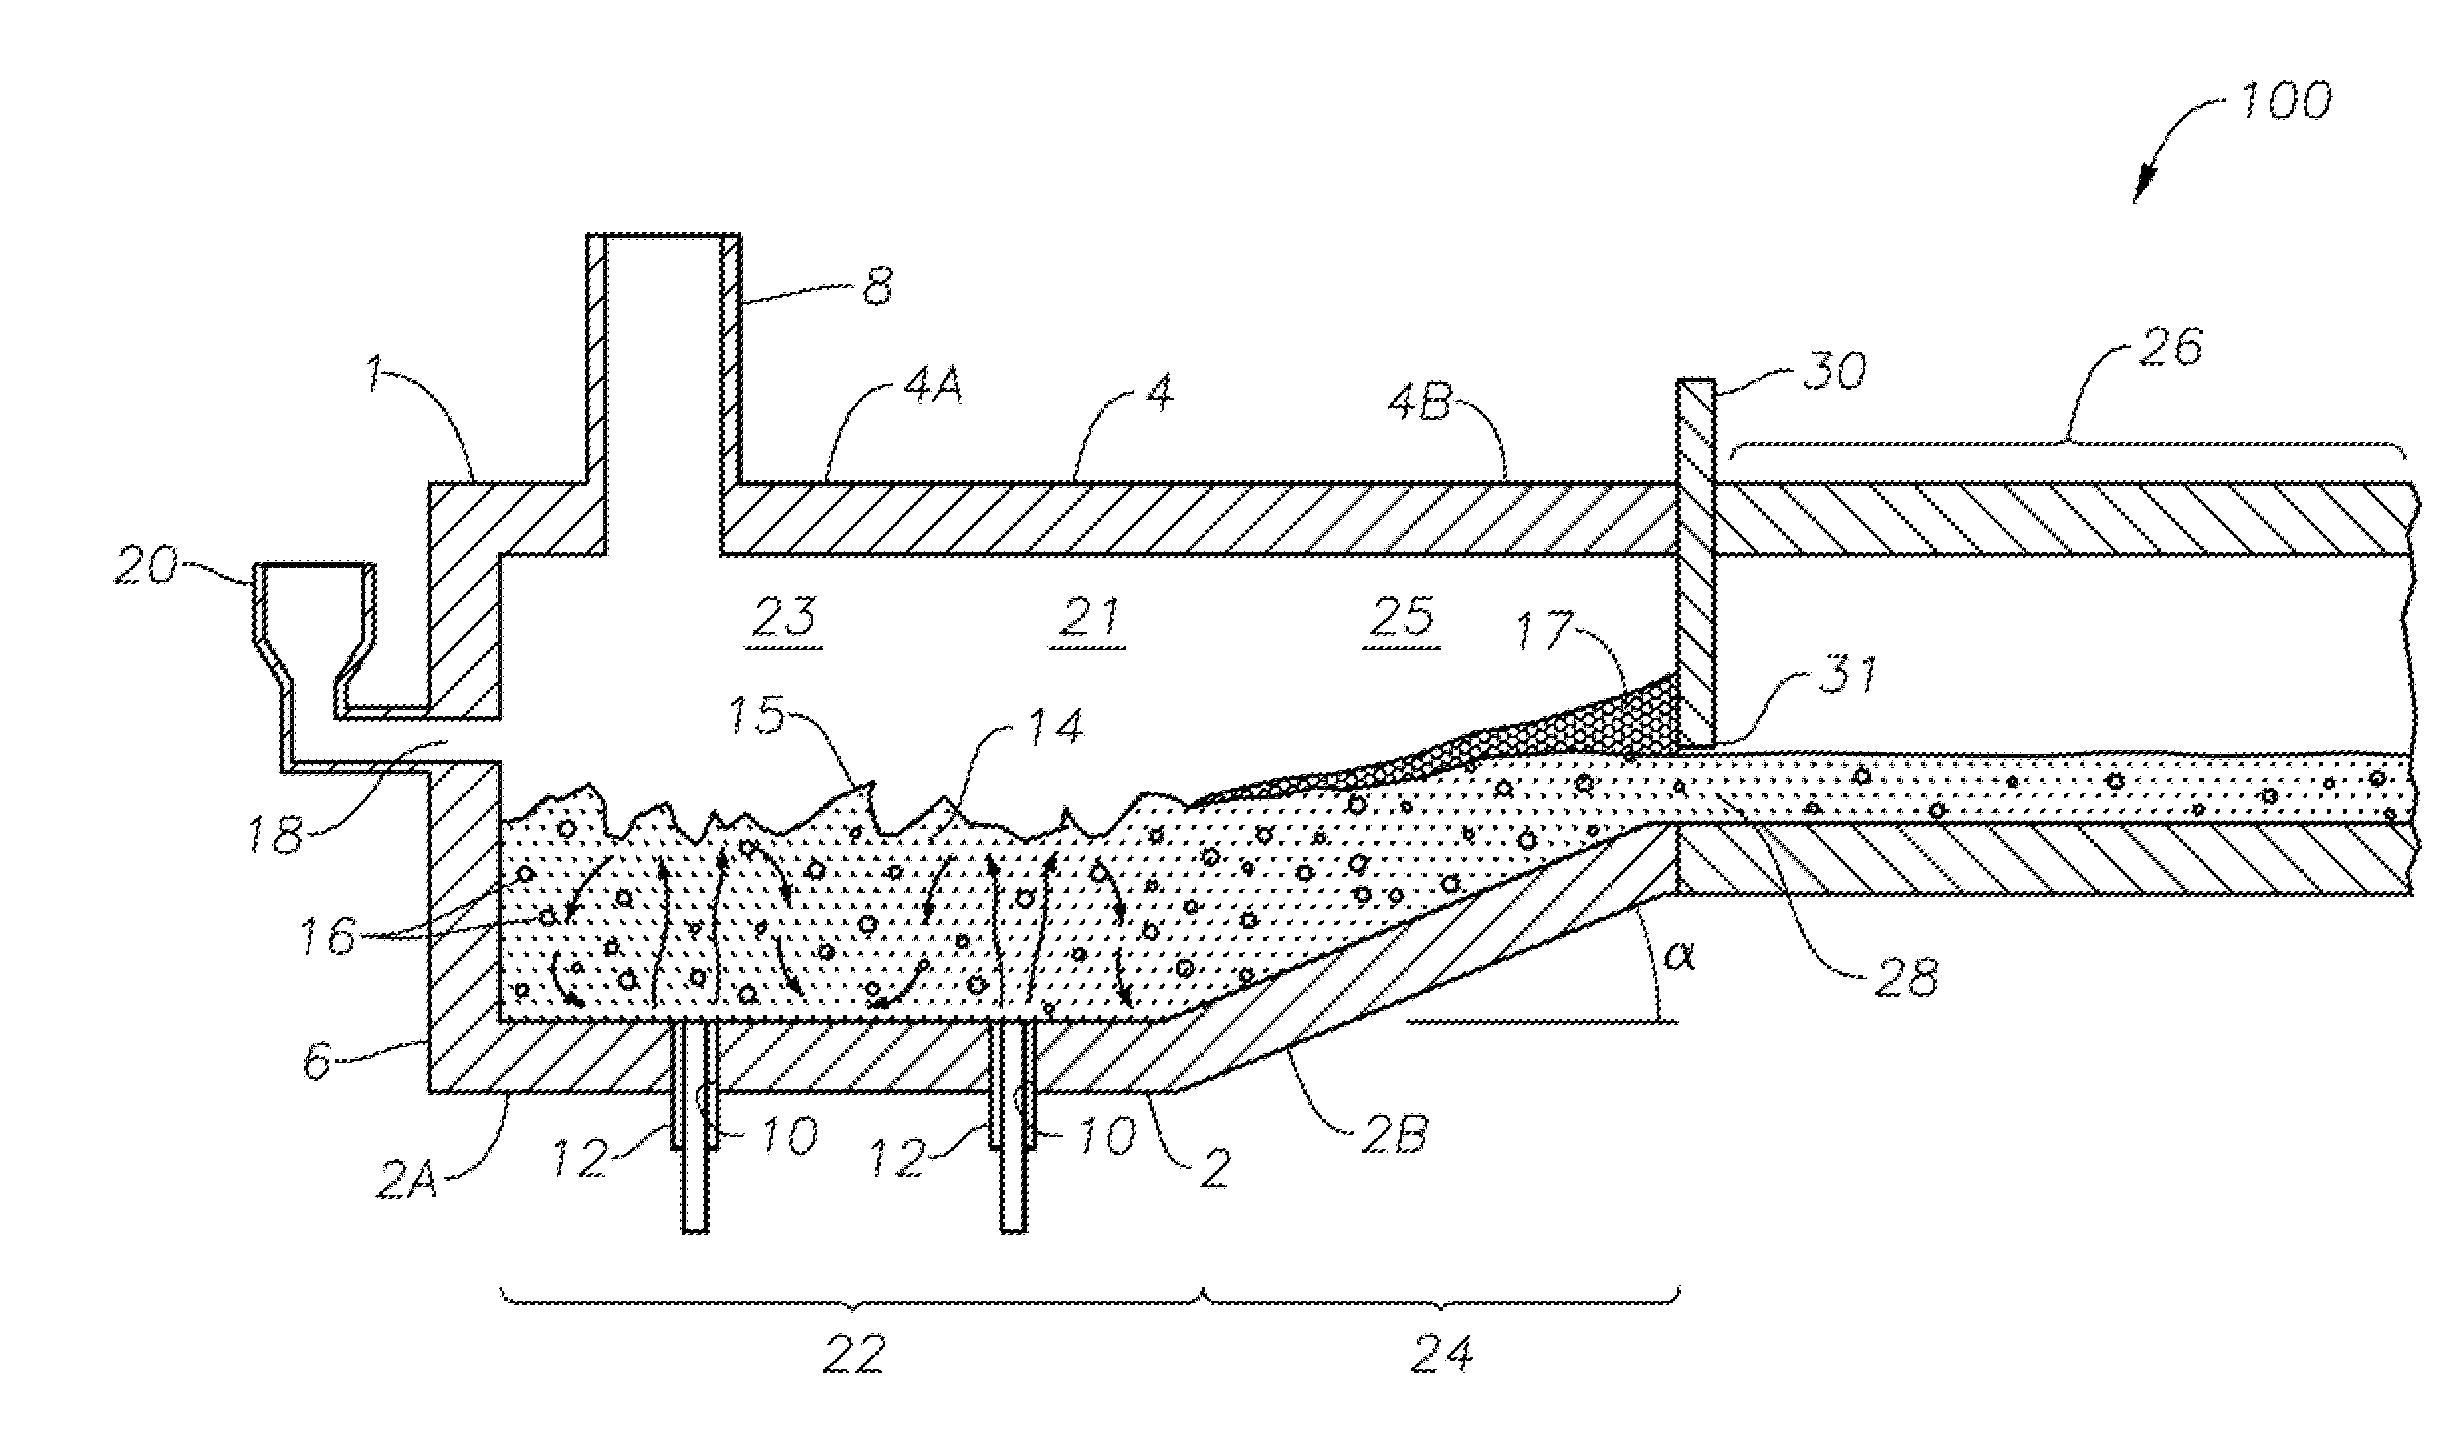 Submerged combustion melters having an extended treatment zone and methods of producing molten glass